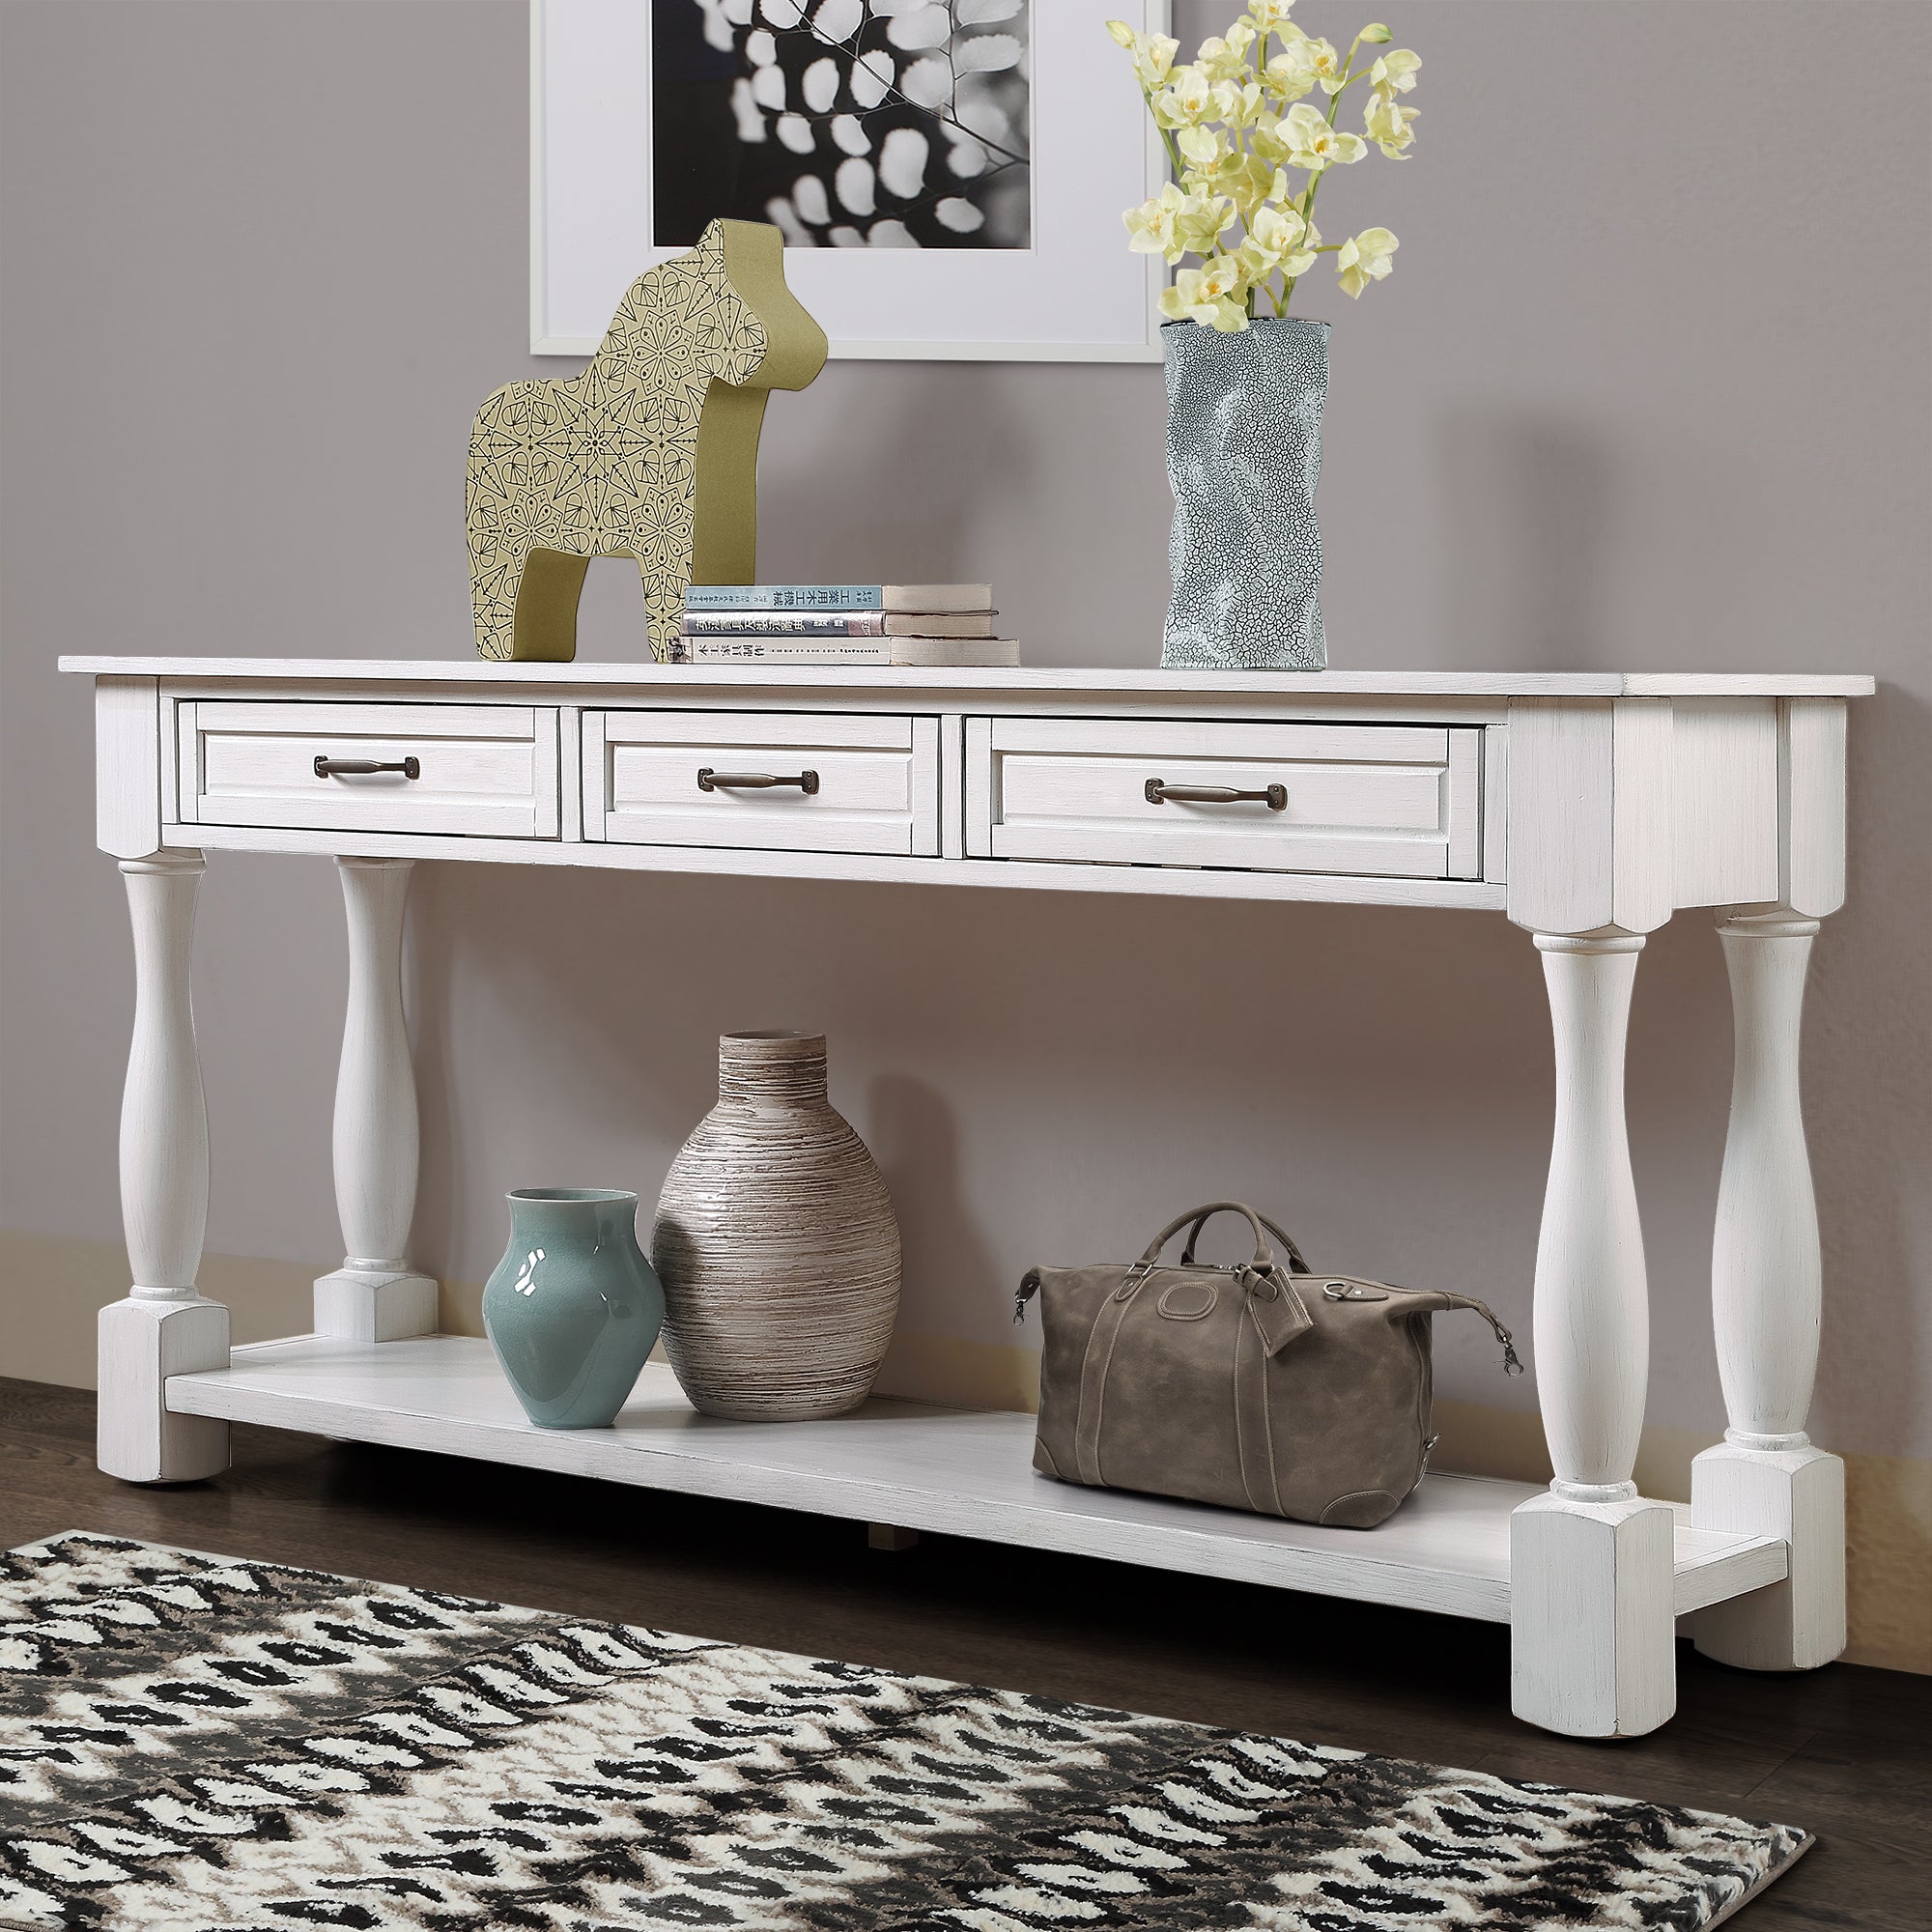 Anderson antique white 63" Wood Entryway Accent Console Table Storage Sideboard